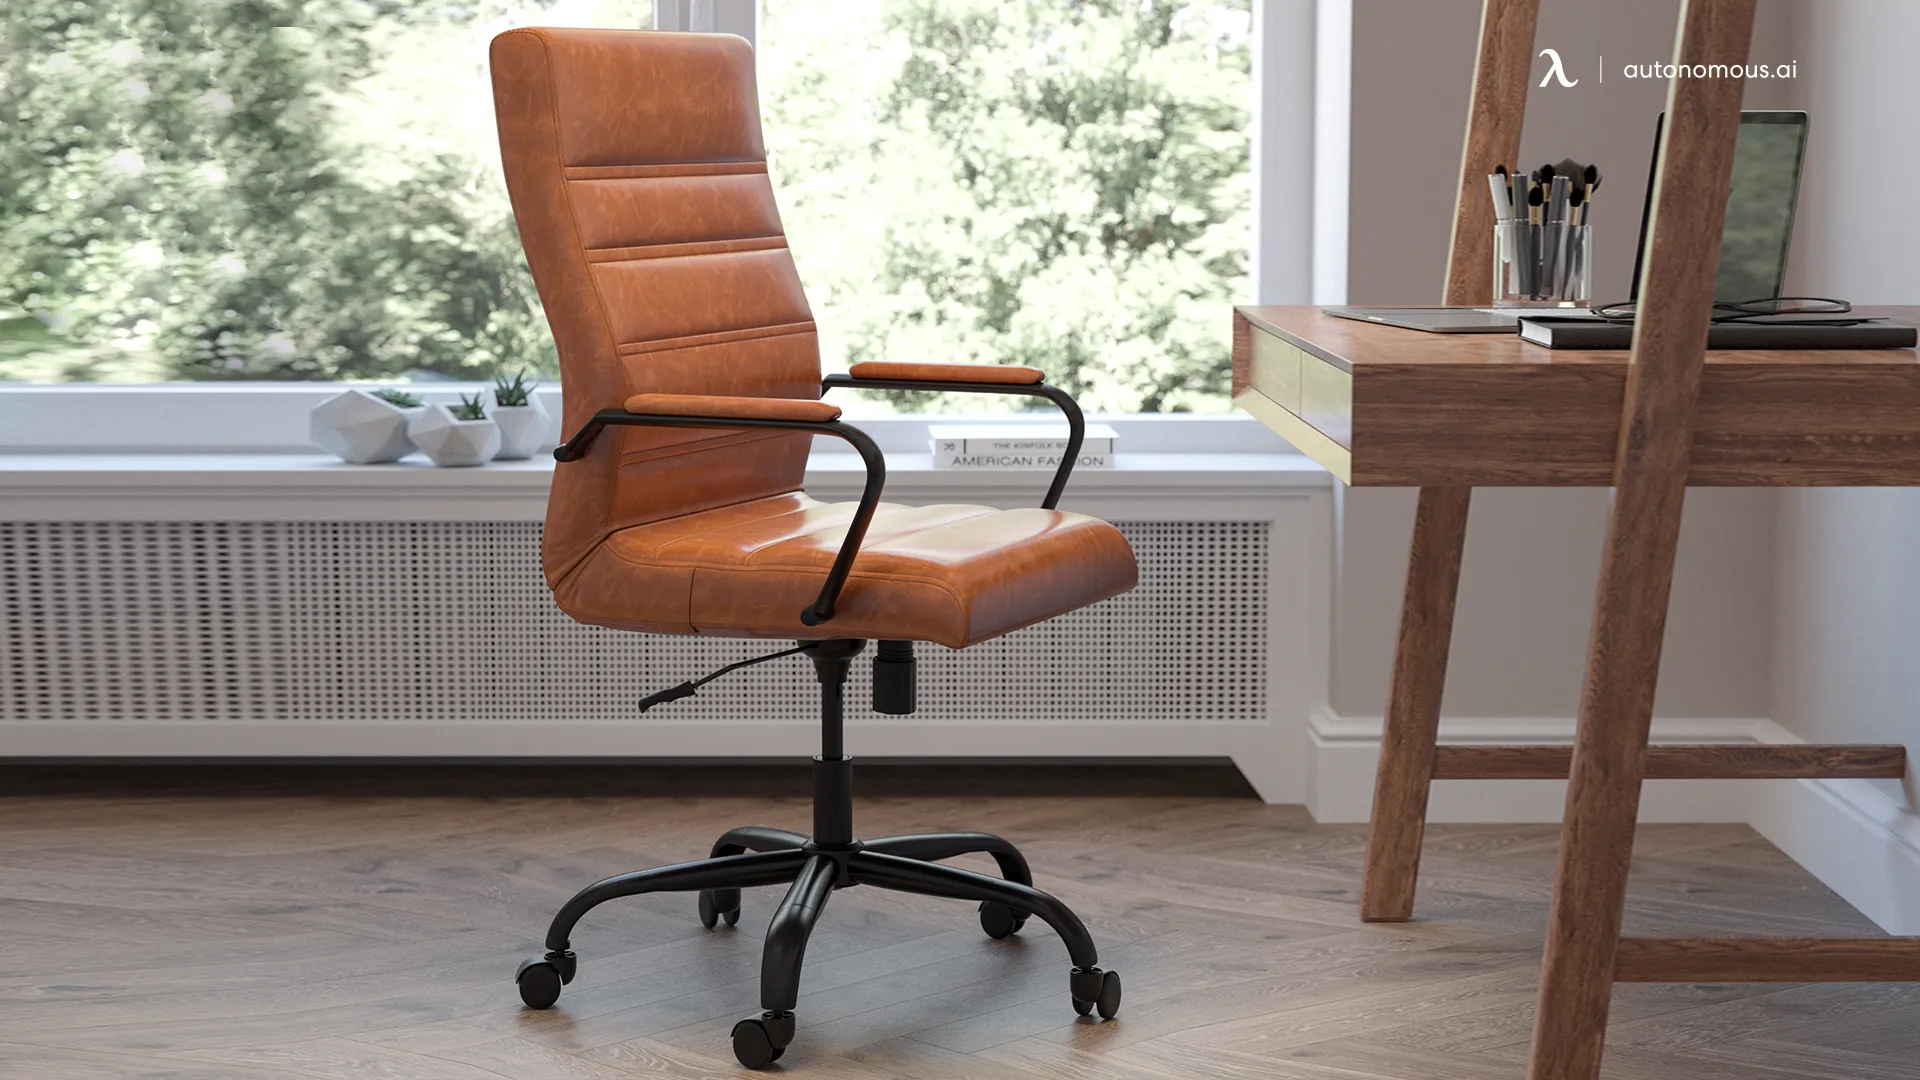 Why Do You Need a Real Leather Office Chair?